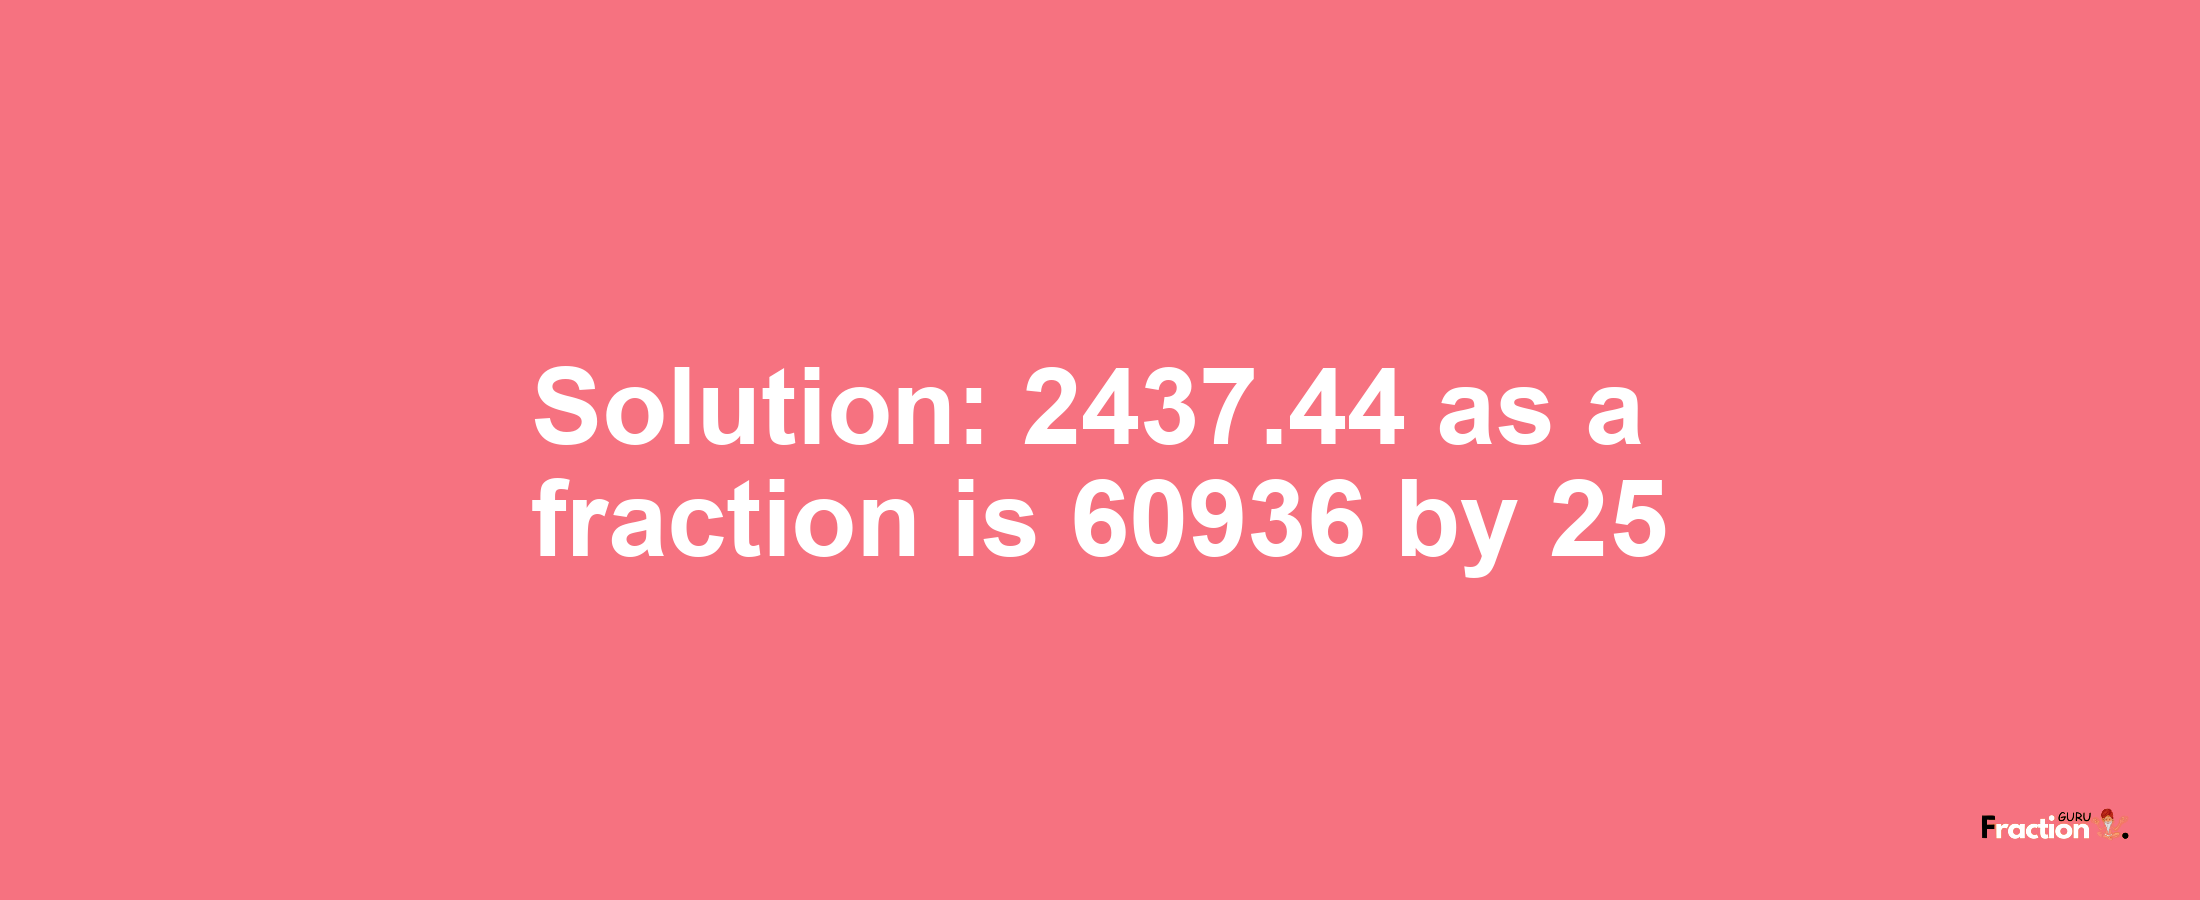 Solution:2437.44 as a fraction is 60936/25